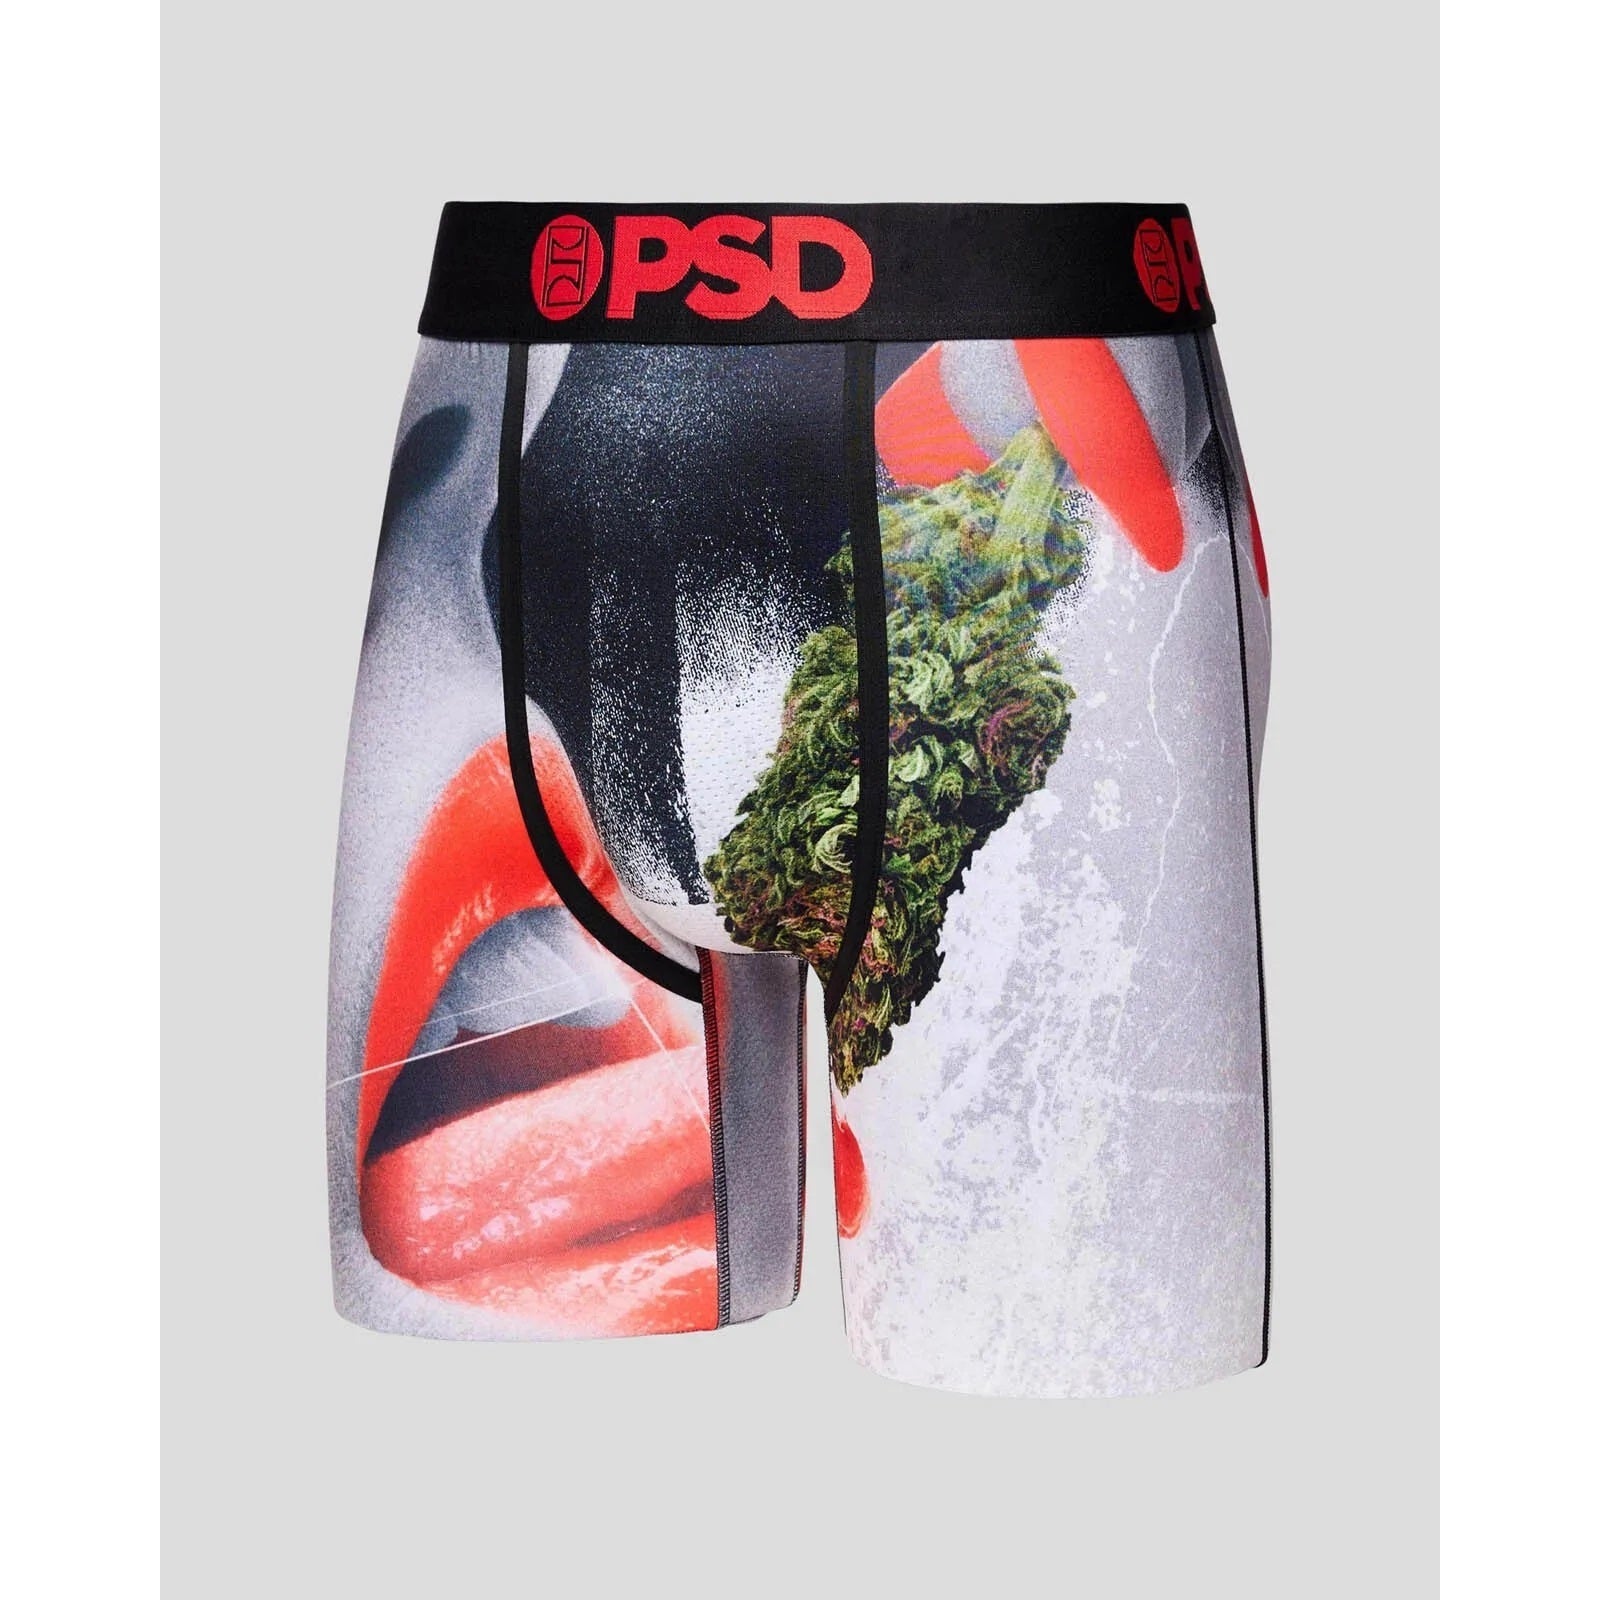 PSD Underwear Australia - Starting the week with the new Hype